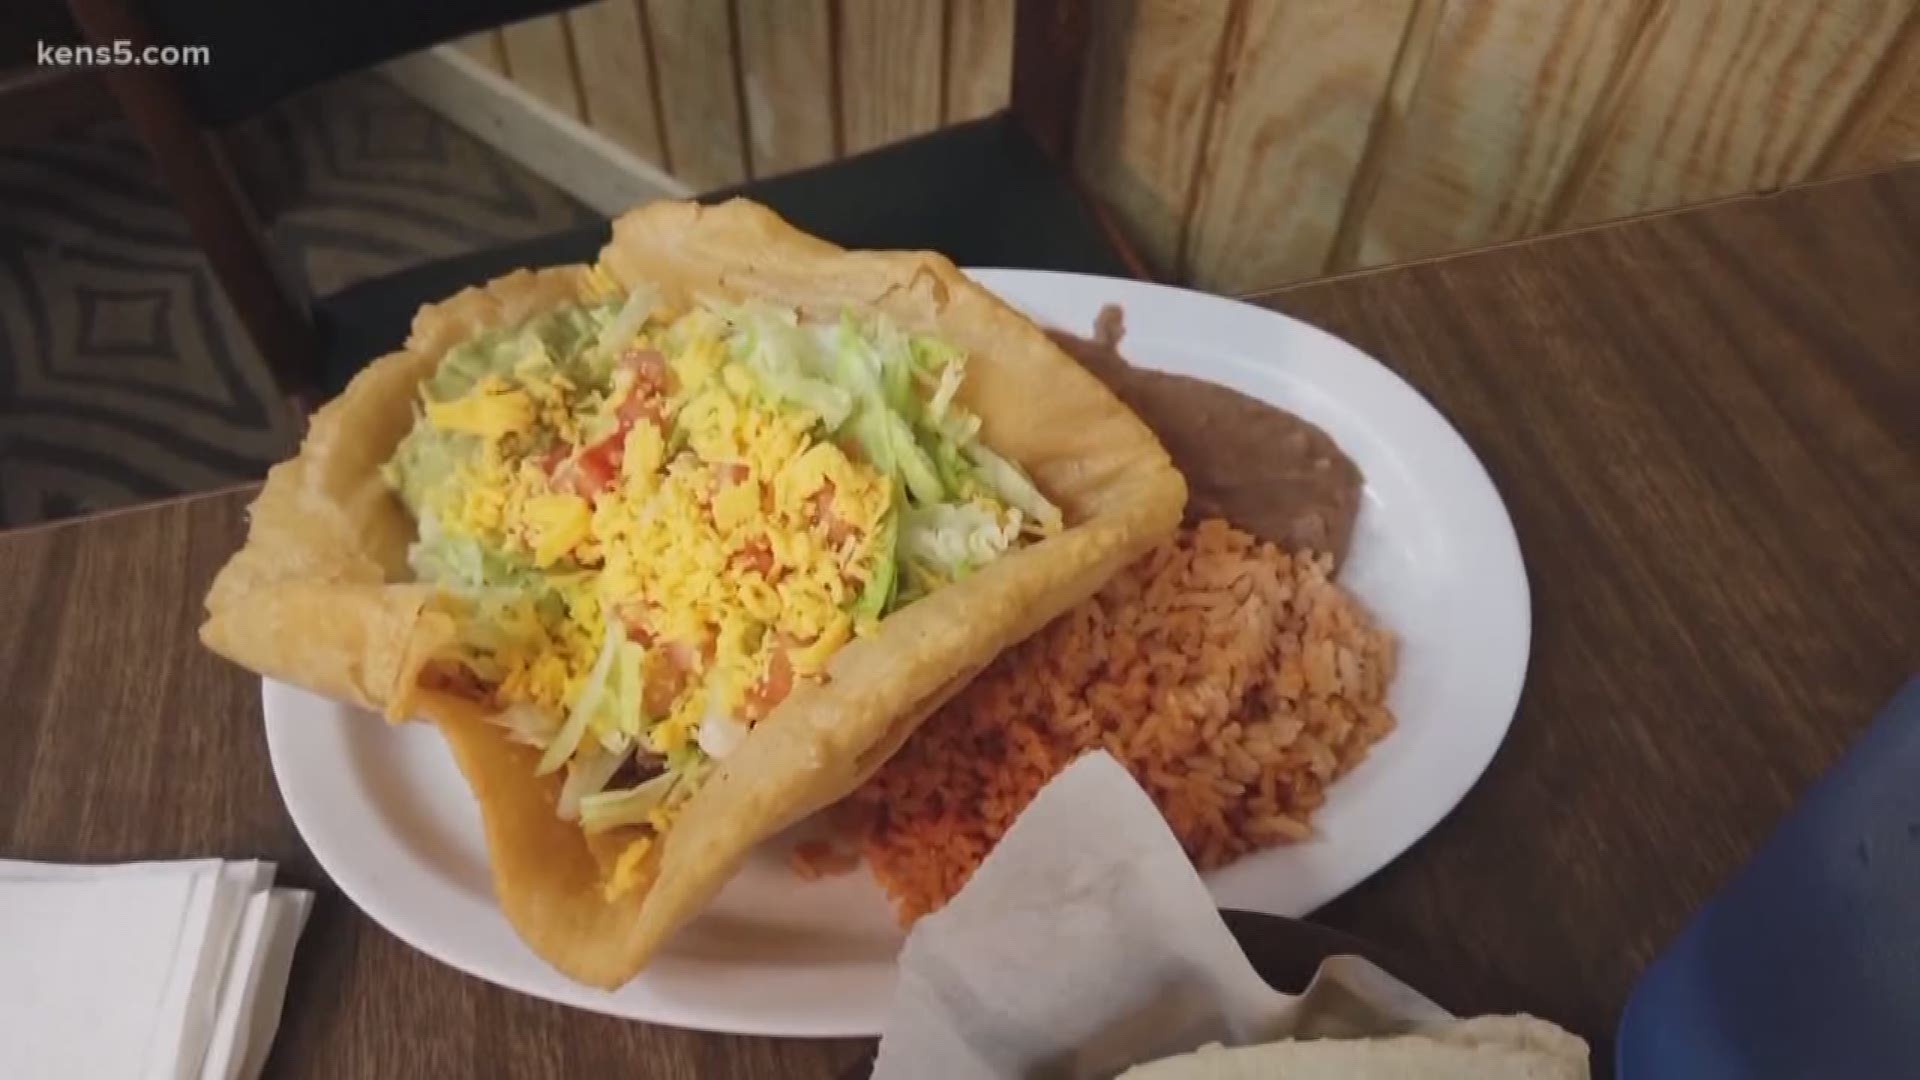 We check out Rolando's Super Tacos in this week's Neighborhood Eats.